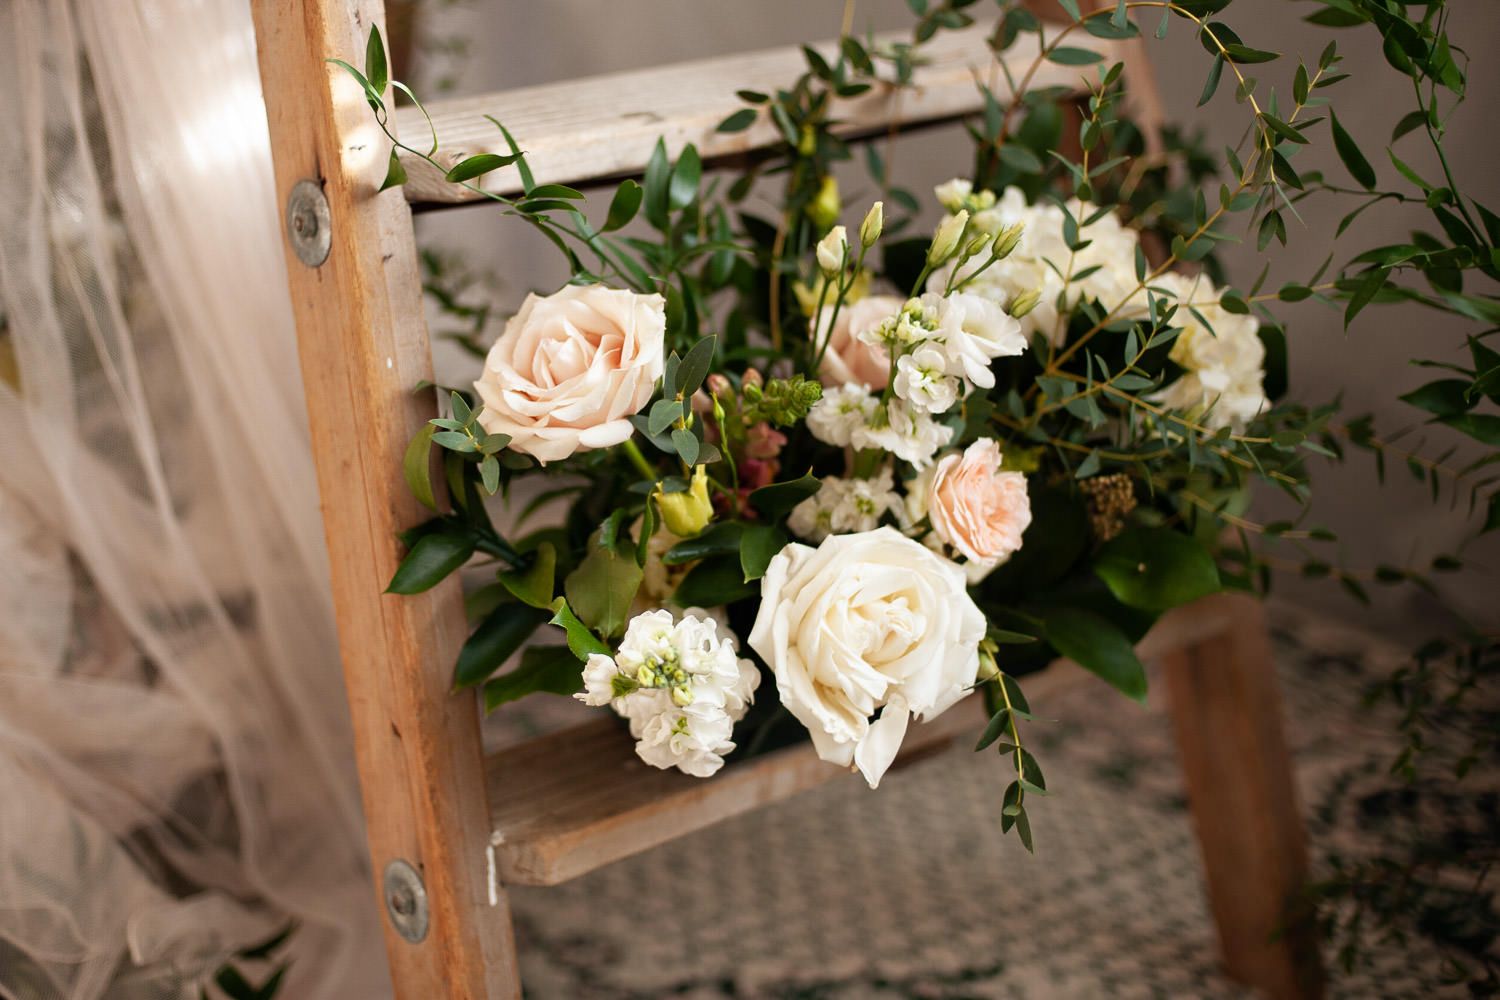 Peach and vanilla roses captured by Tara Whittaker Photography